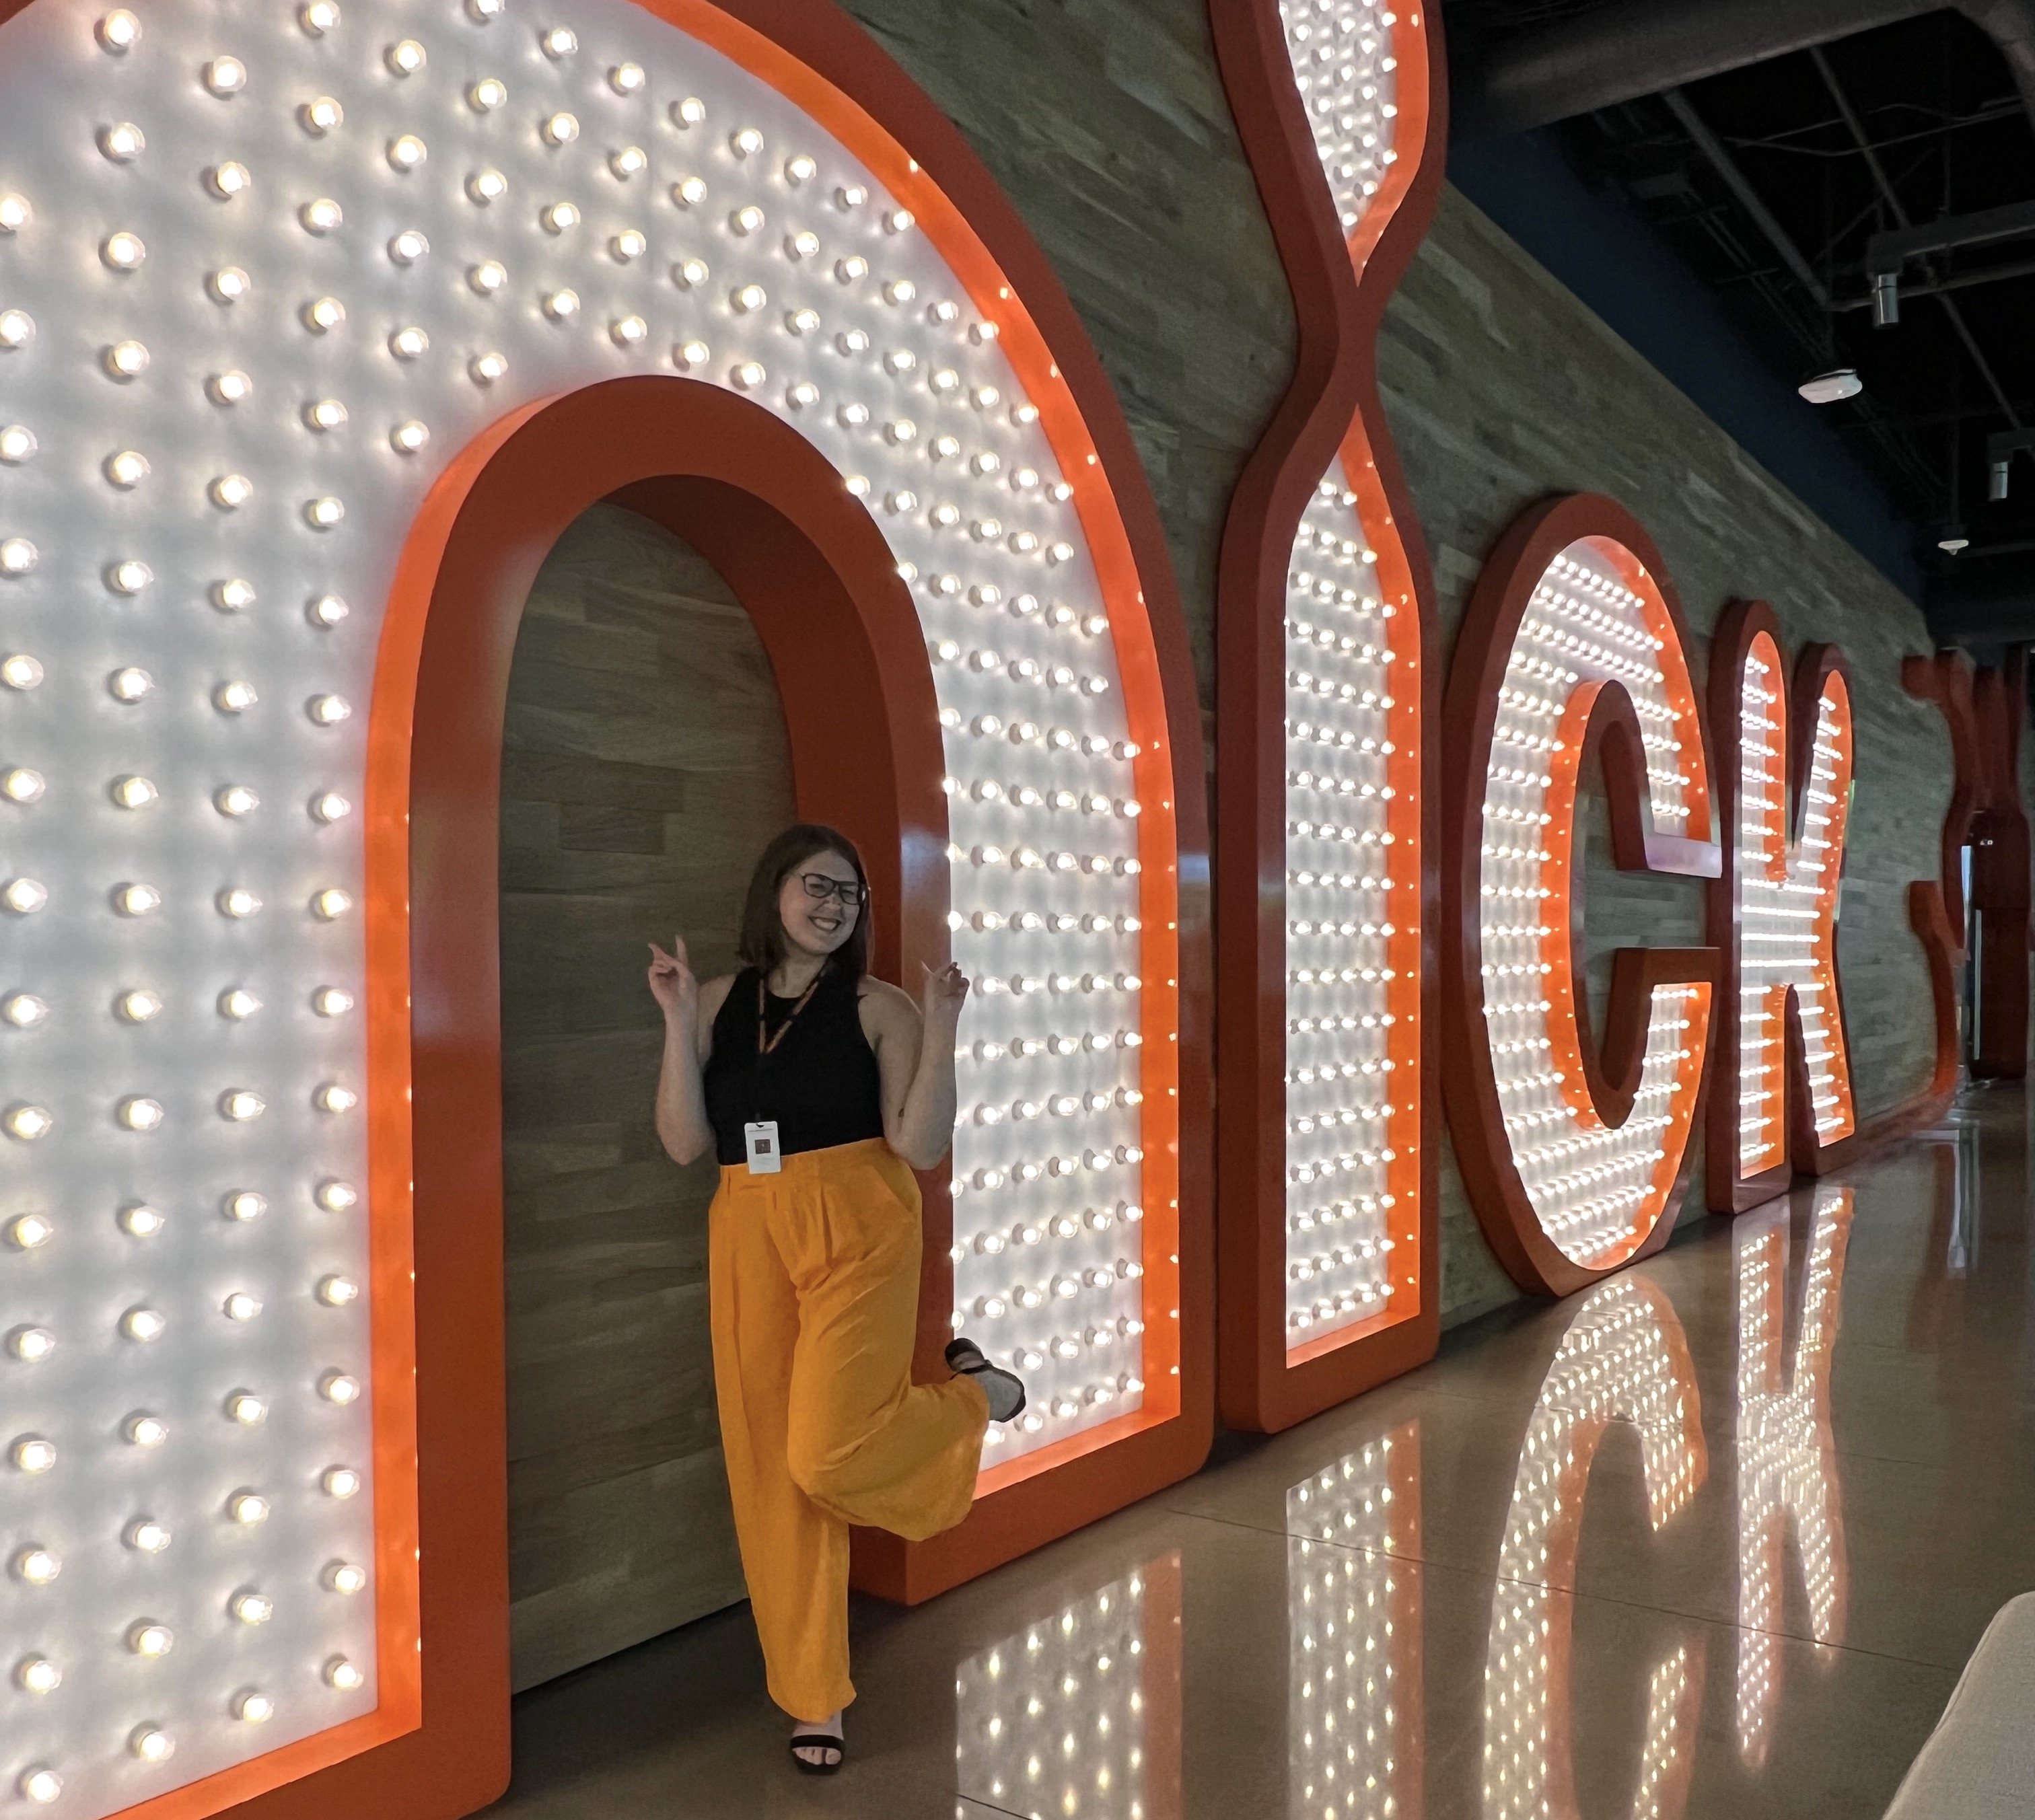 Allison Irey poses for a picture in front of a light-up "nick" sign at Nickelodeon Animation Studio